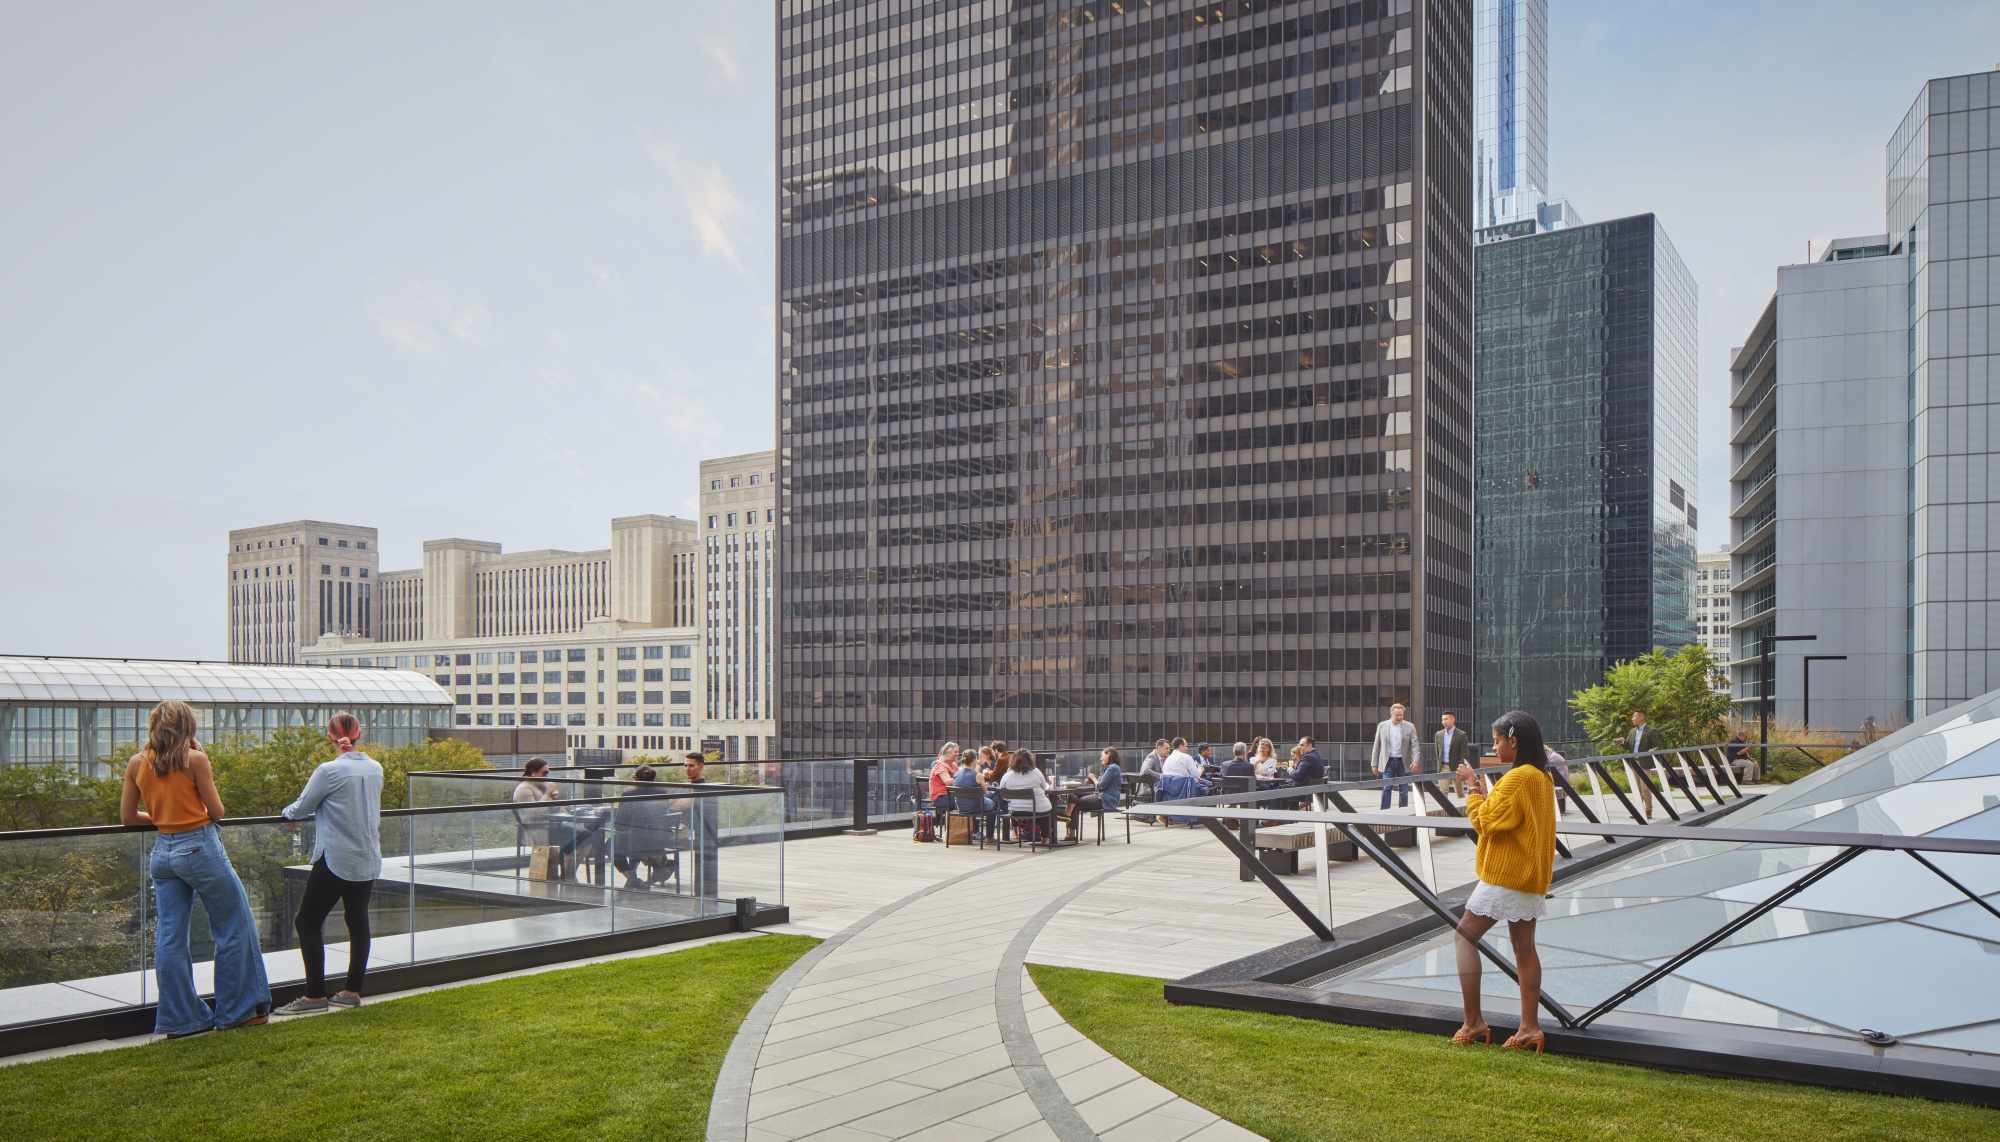 The Willis Tower in Chicago now boasts an outdoor roof garden and a host of other features that aim to make the skyscraper a community gathering place as well as a workplace.&nbsp;